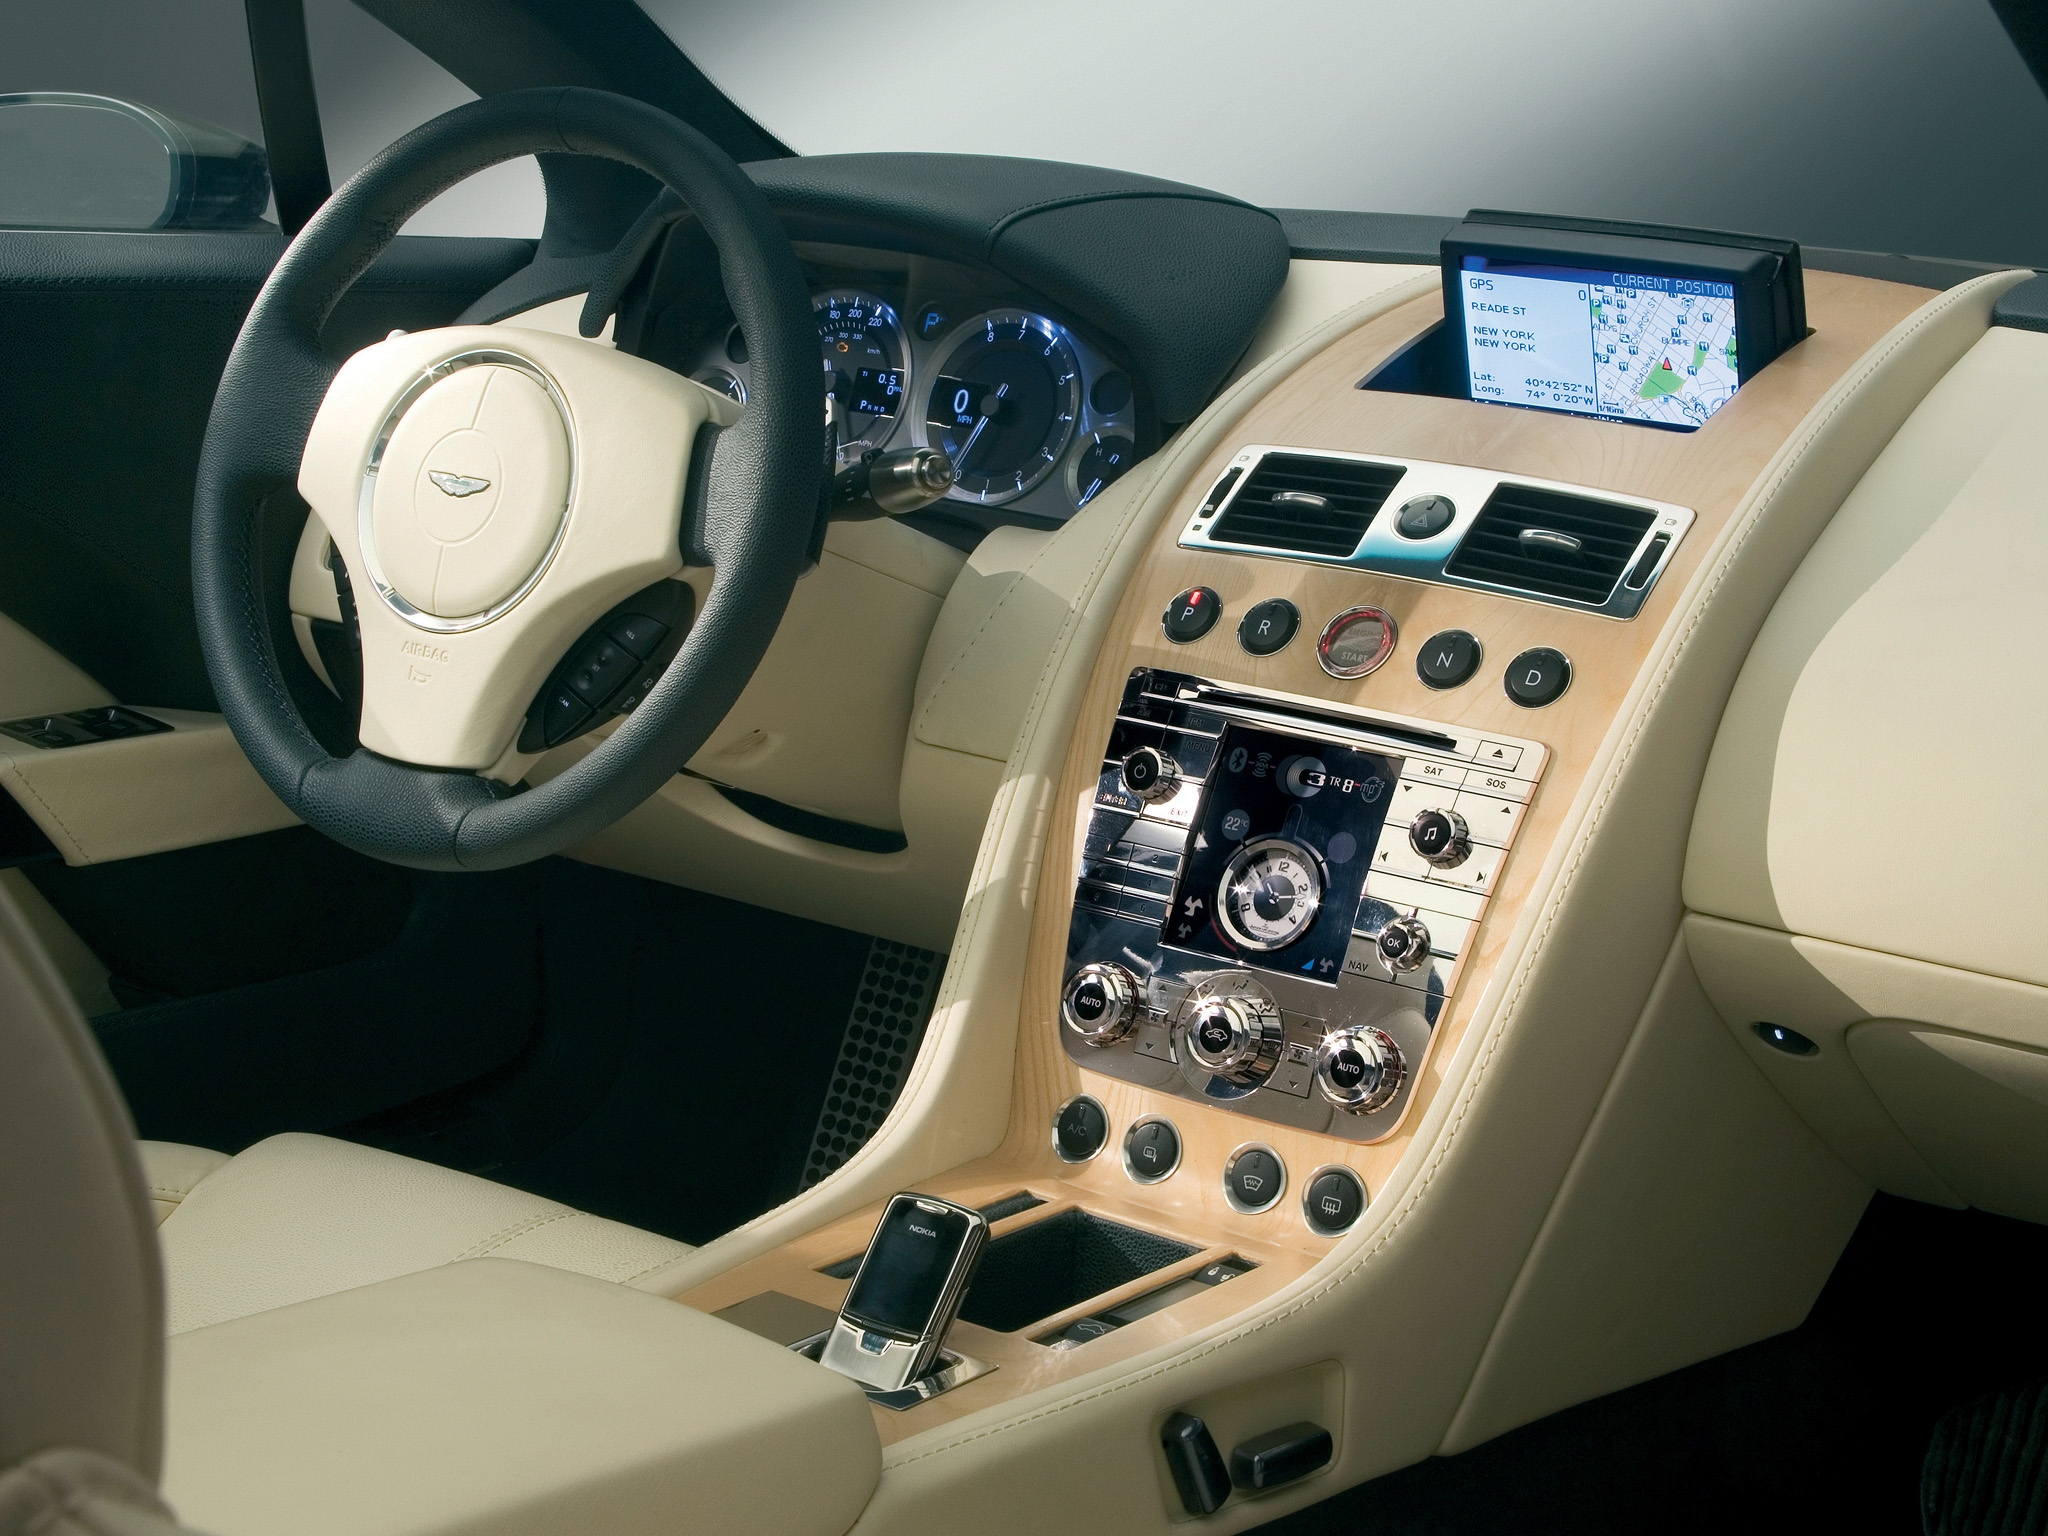 146641 download wallpaper interior, aston martin, cars, steering wheel, rudder, salon, speedometer, concept car, 2006, rapide, beige screensavers and pictures for free